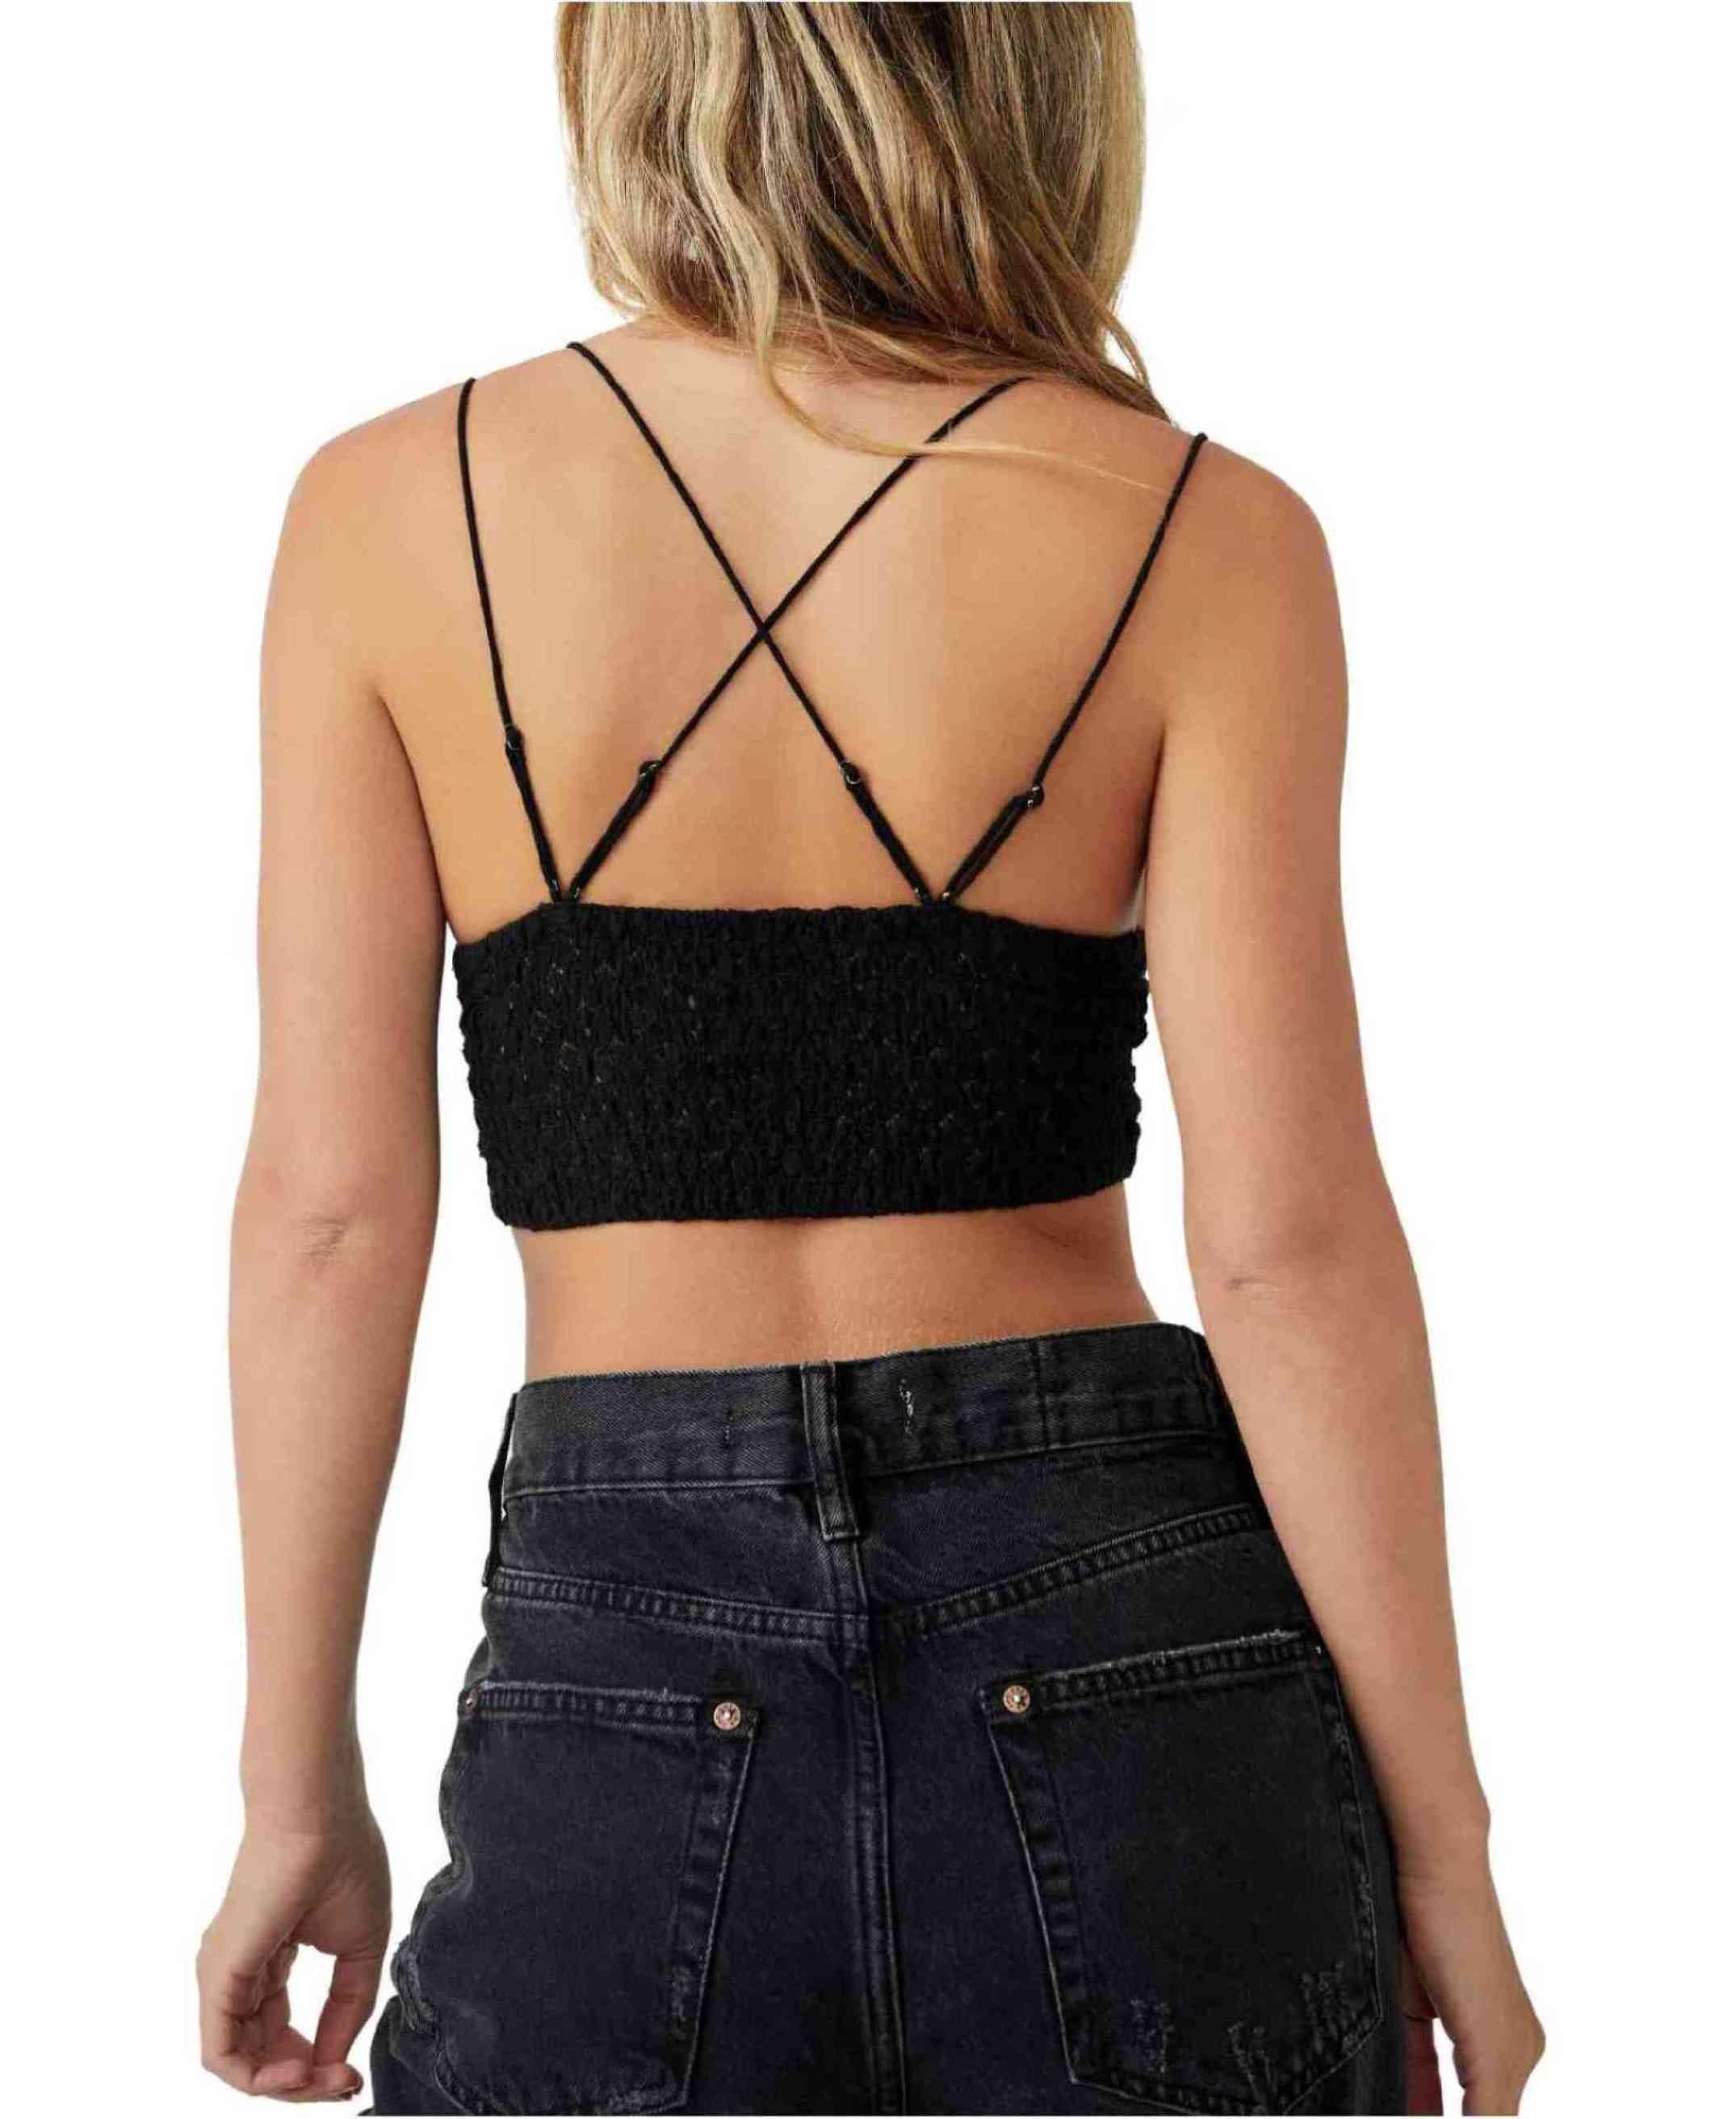 Wild Lily - The @freepeople Adella Bralette is back in